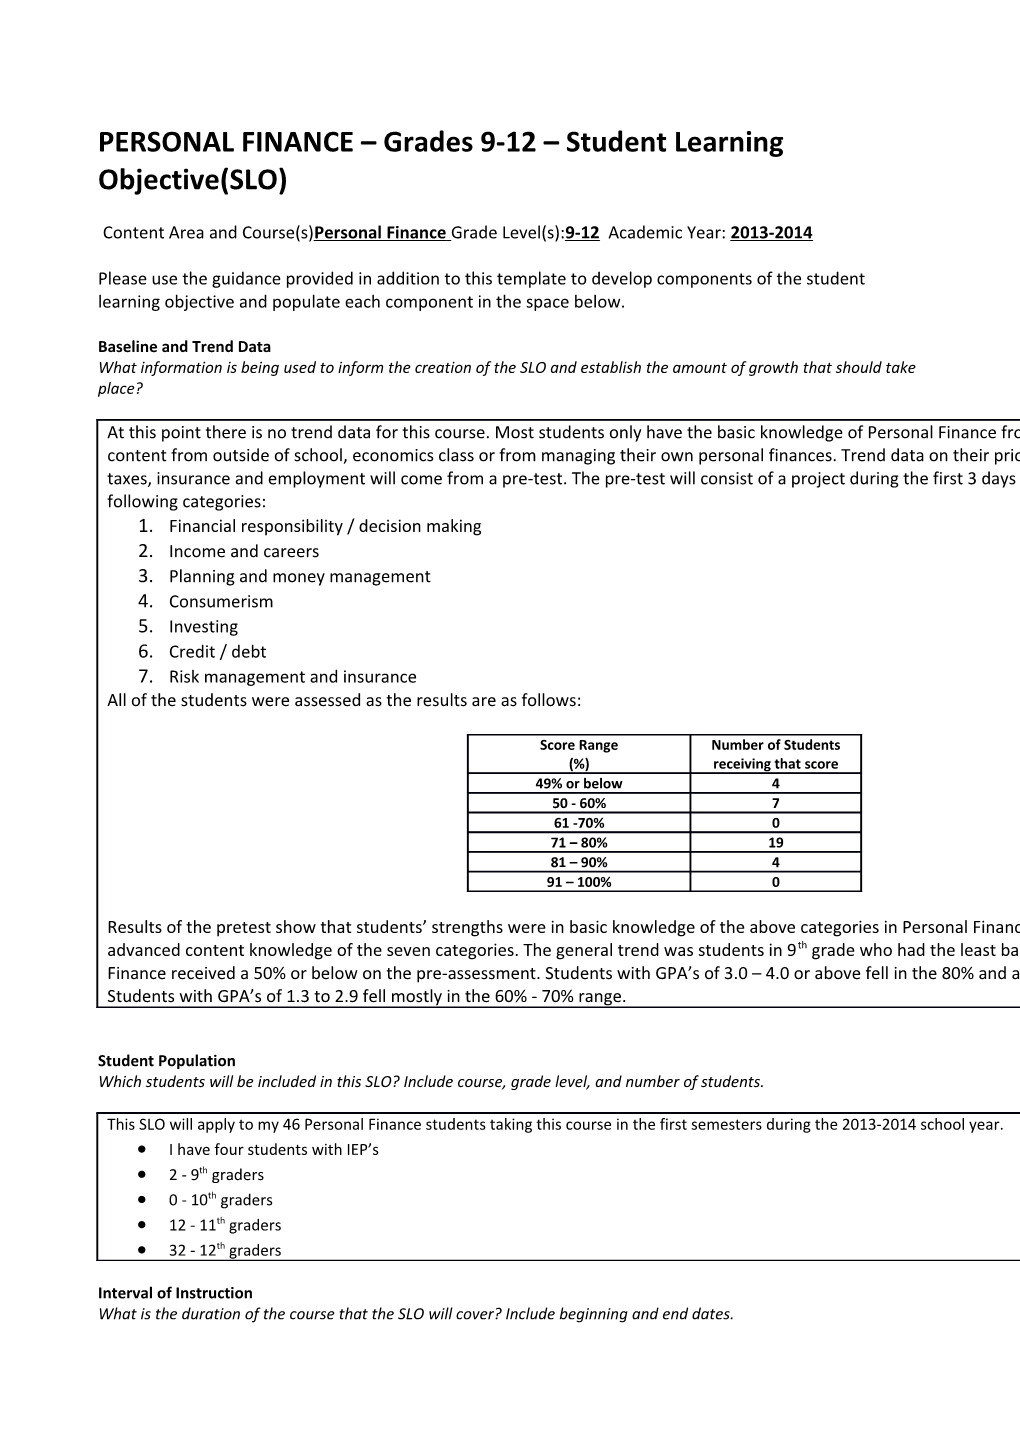 PERSONAL FINANCE Grades 9-12 Student Learning Objective(SLO)